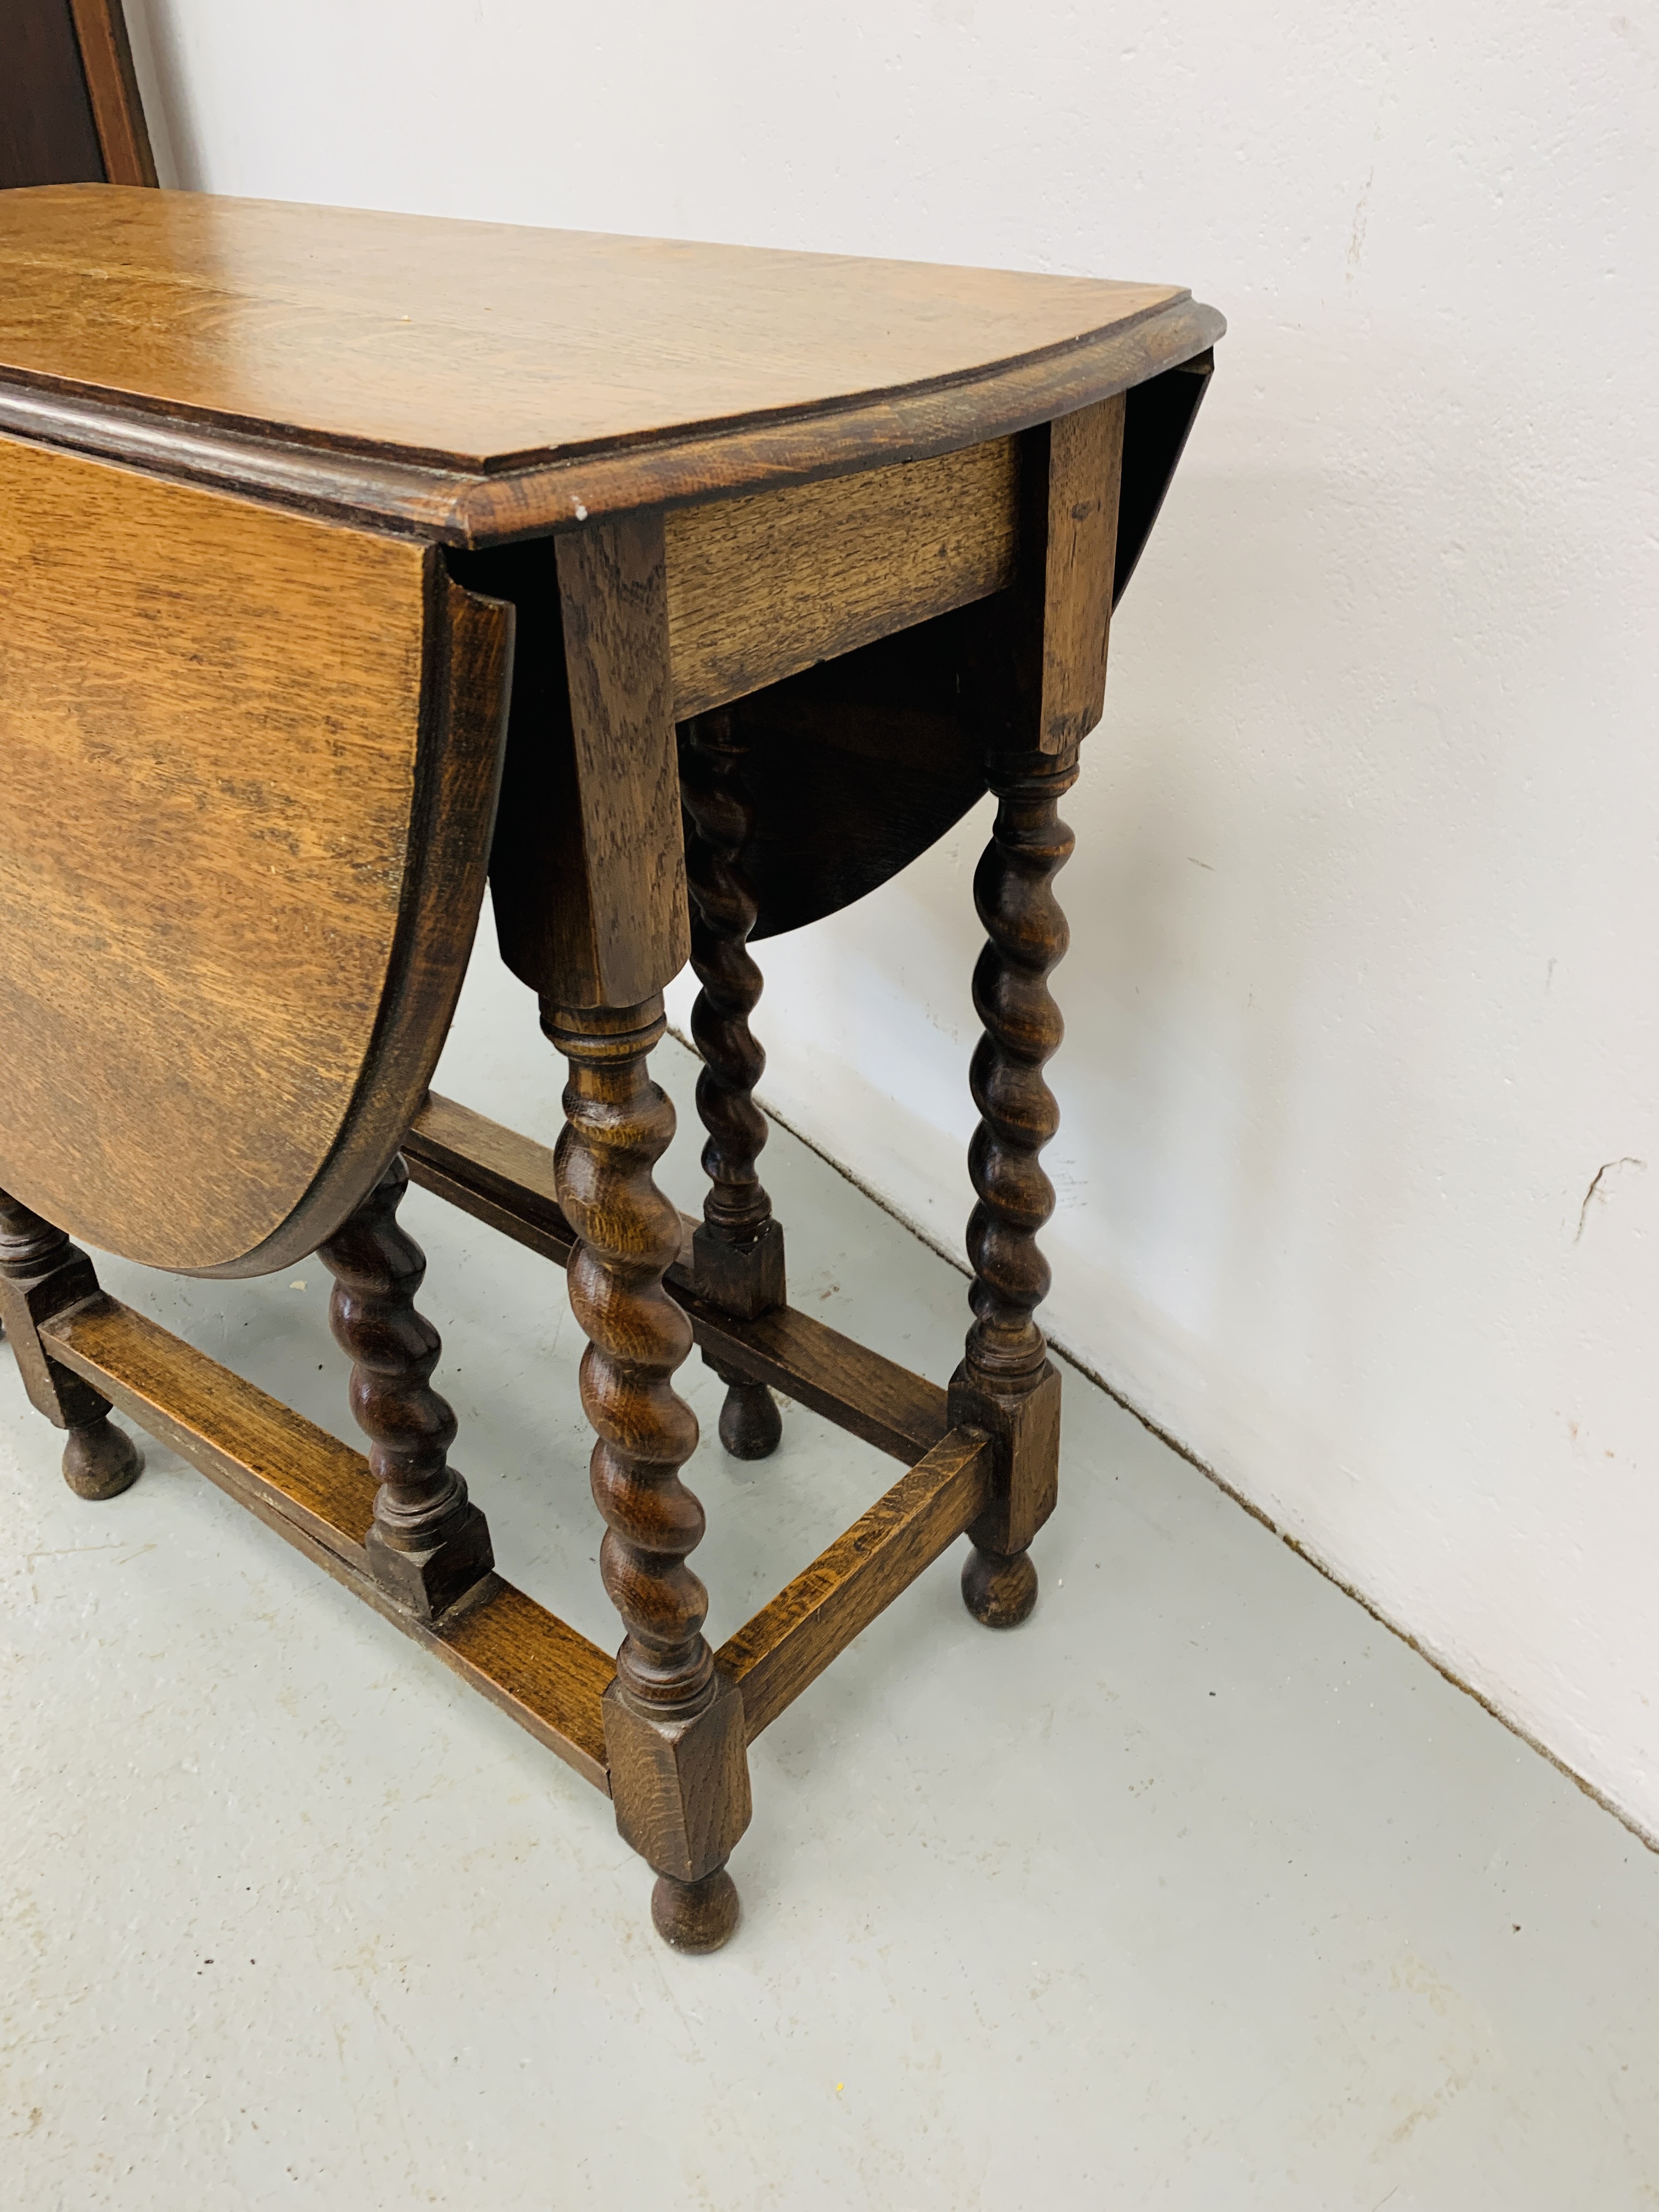 AN OAK BARLEY TWIST TABLE WITH GATELEG ACTION. - Image 5 of 6